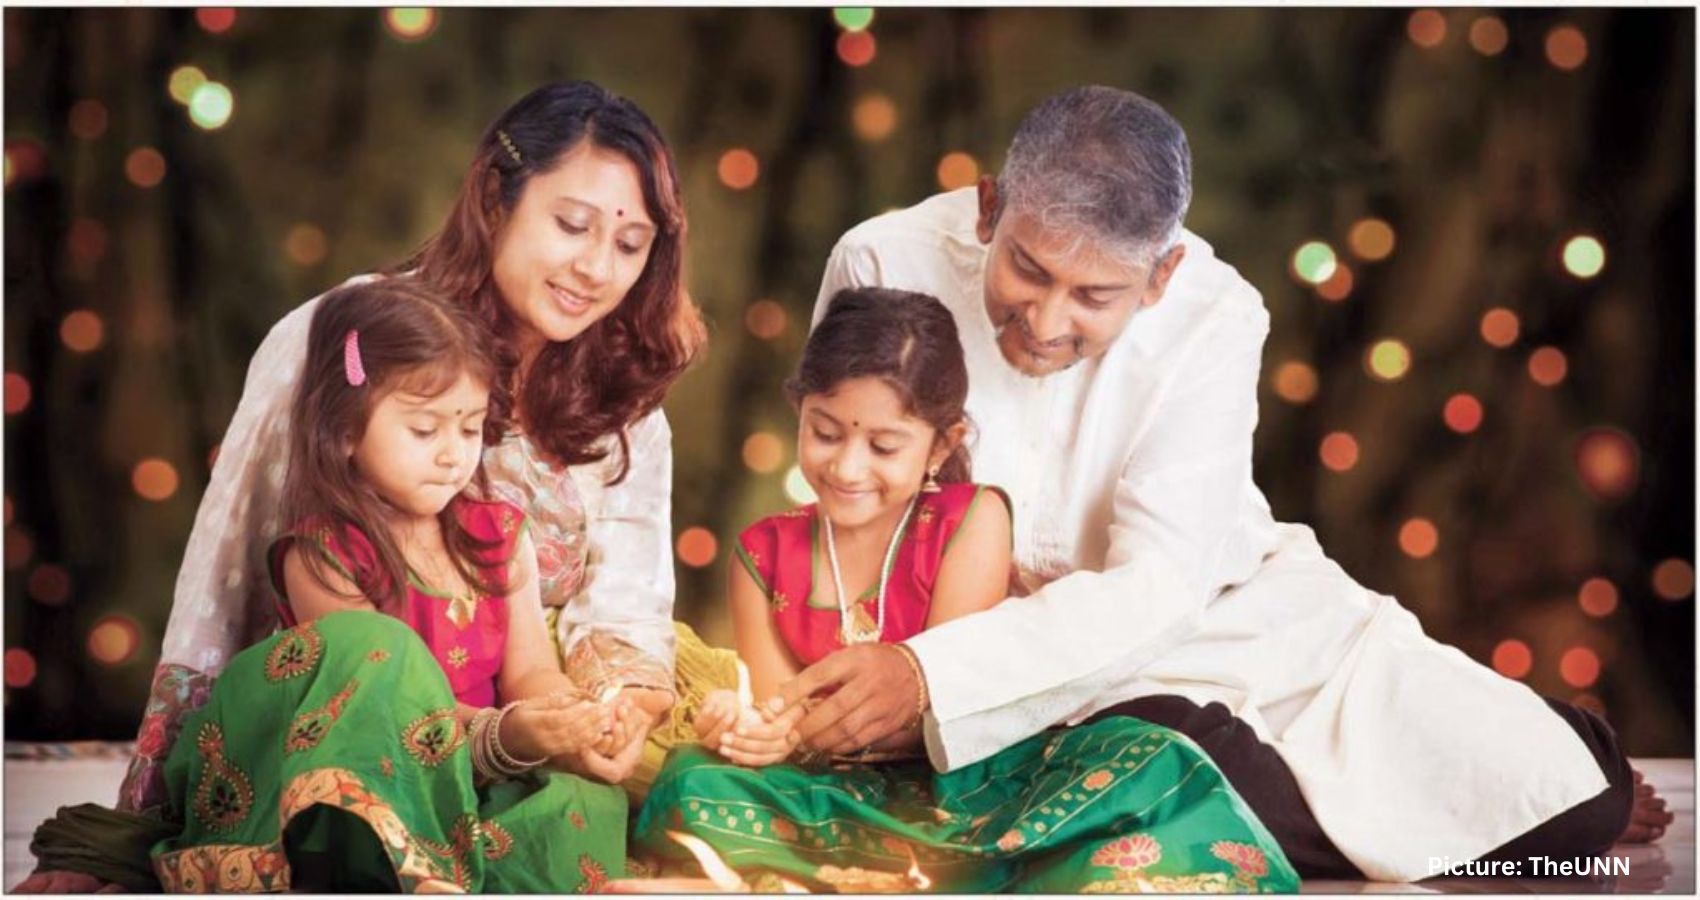 American Hindu Parents Find Creative Ways To Pass On The Faith To Their Kids